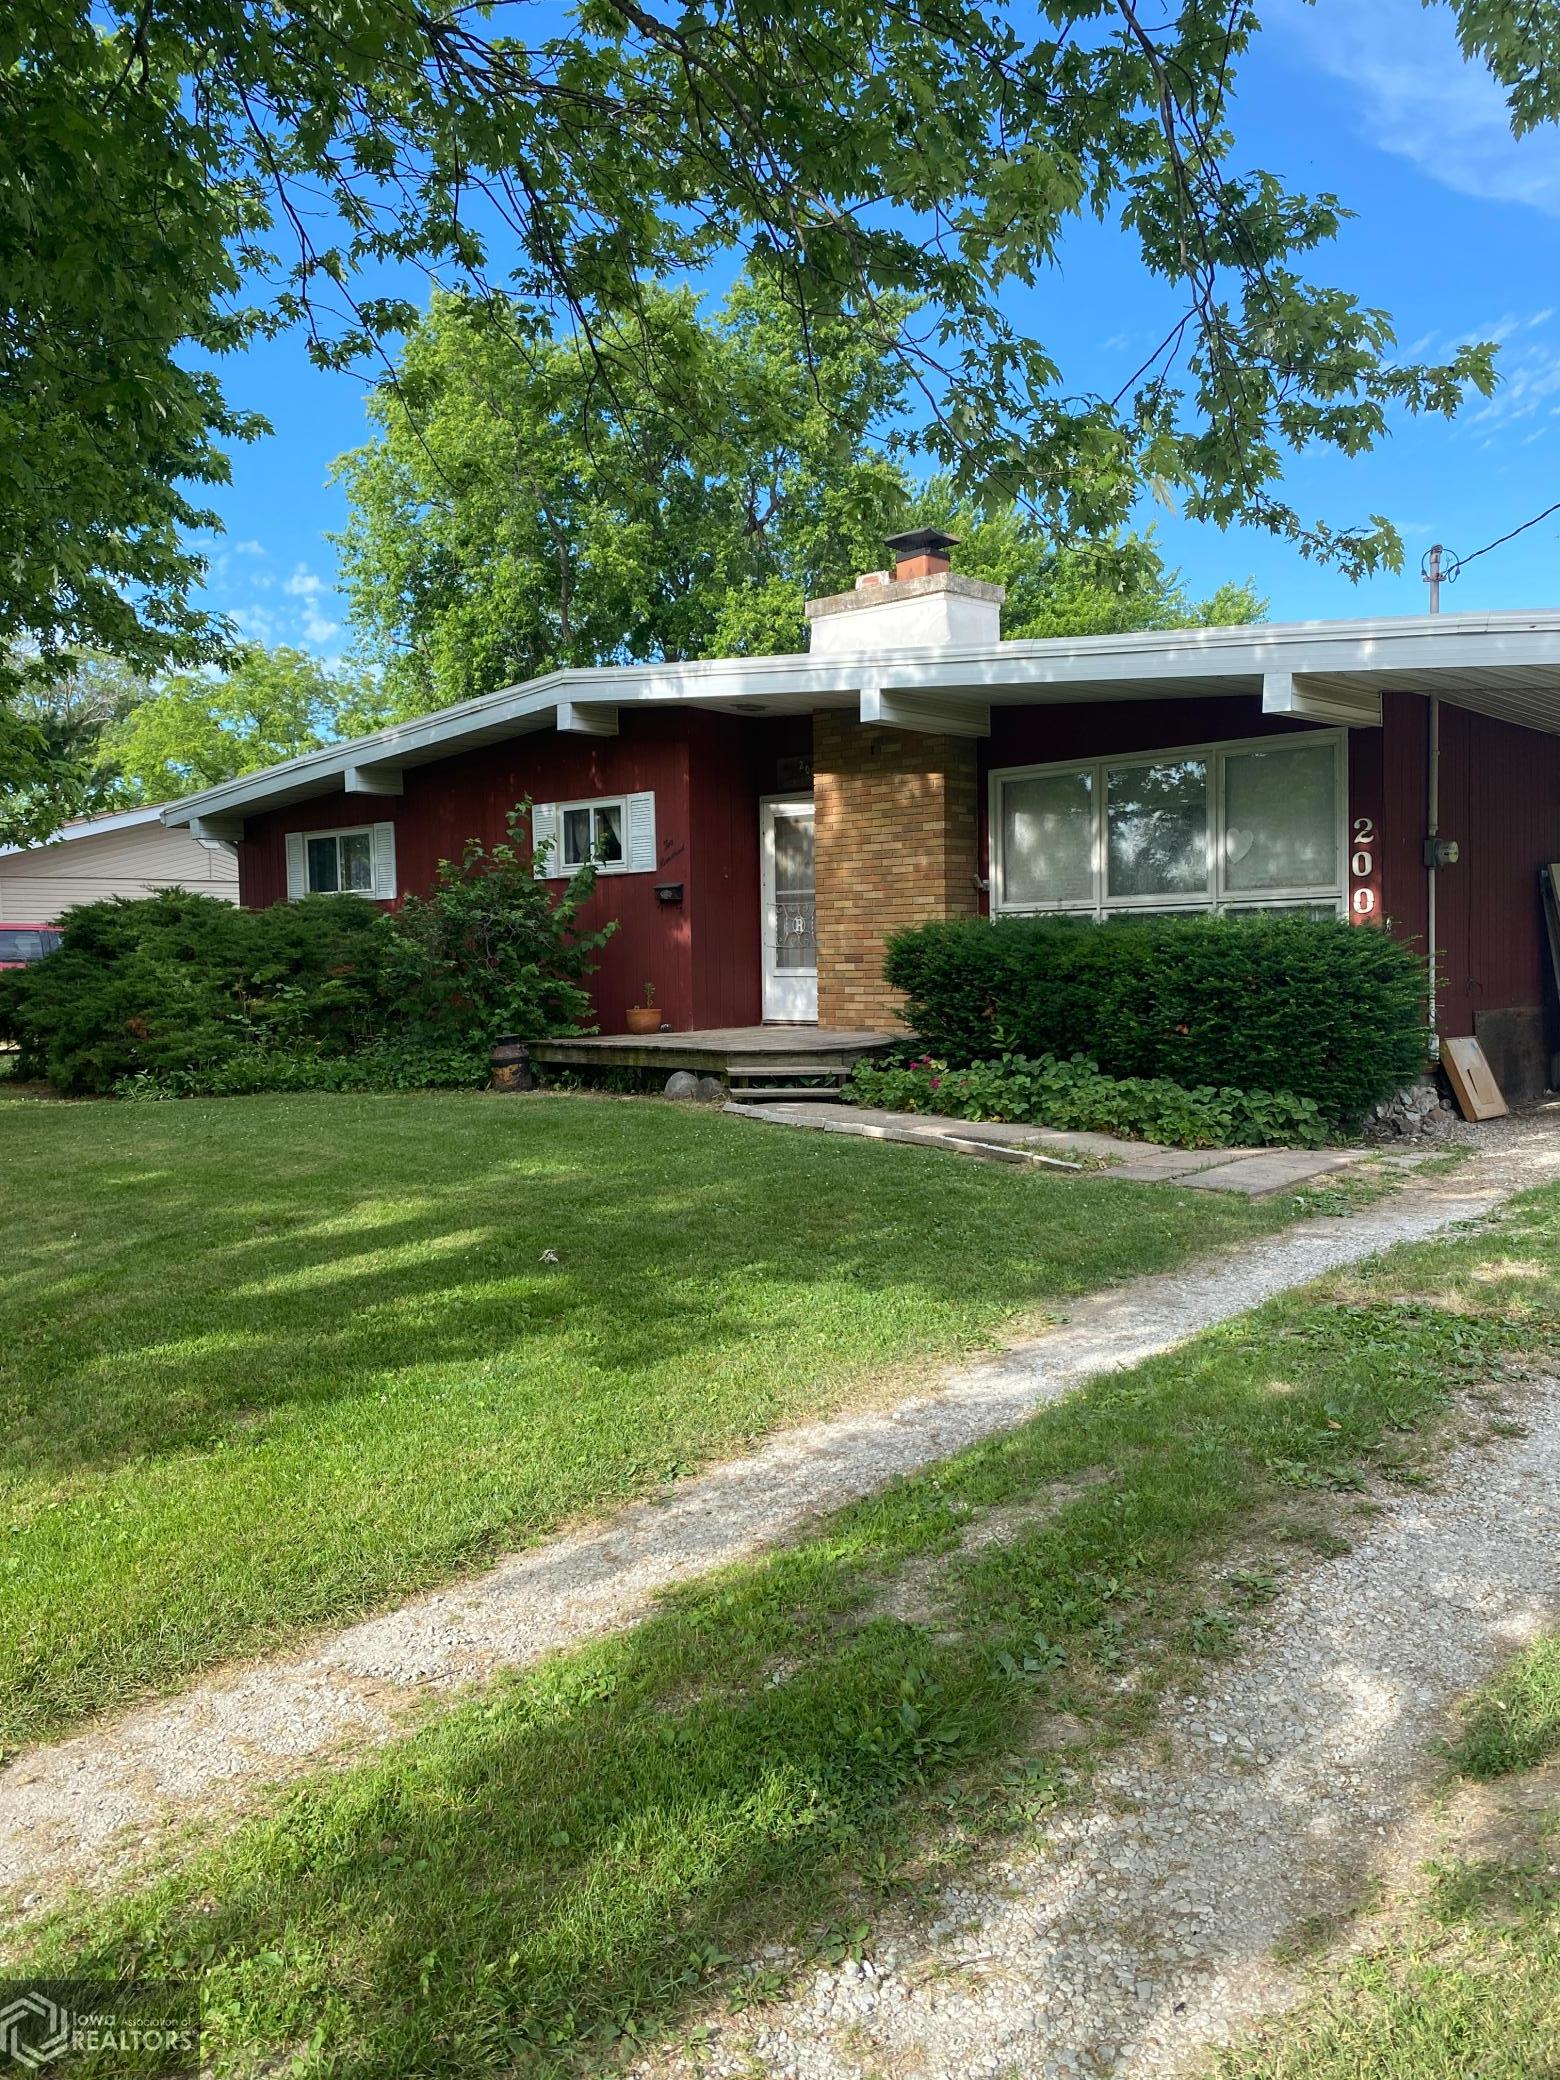 200 20th Street, Hamilton, Illinois 62341, 3 Bedrooms Bedrooms, ,1 BathroomBathrooms,Single Family,For Sale,20th,6143151